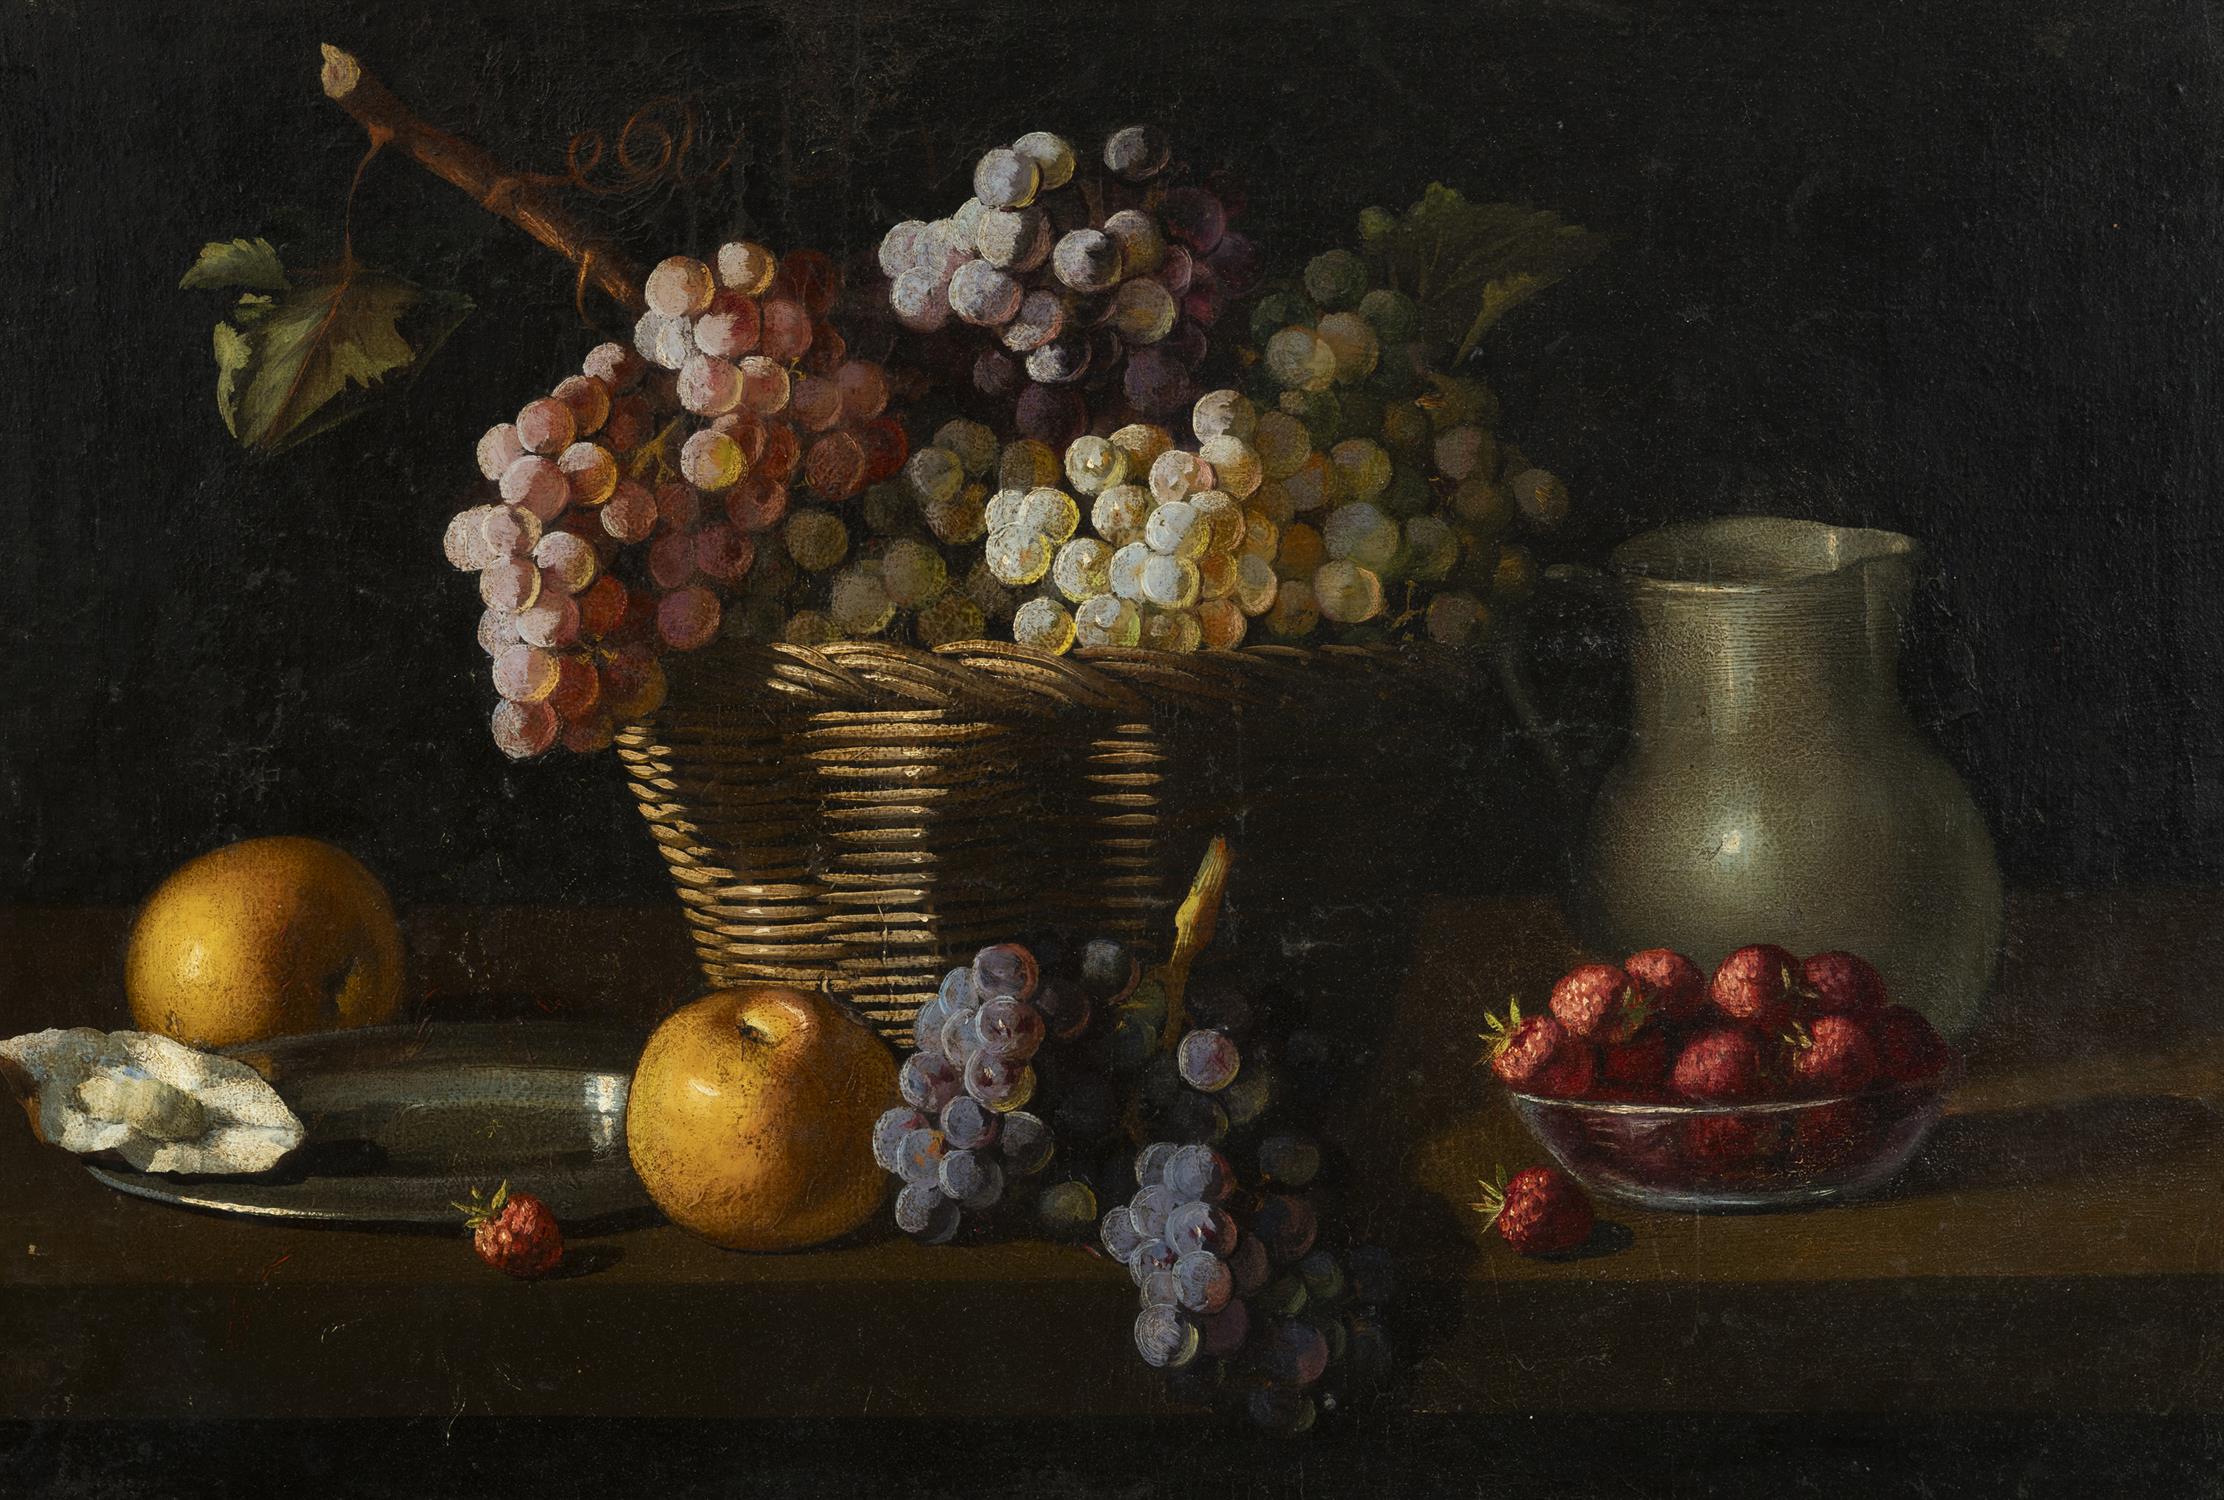 EARLY 19TH CENURY SCHOOL A Still Life with Fruit Oil on canvas, 56 x 80cm - Image 2 of 3